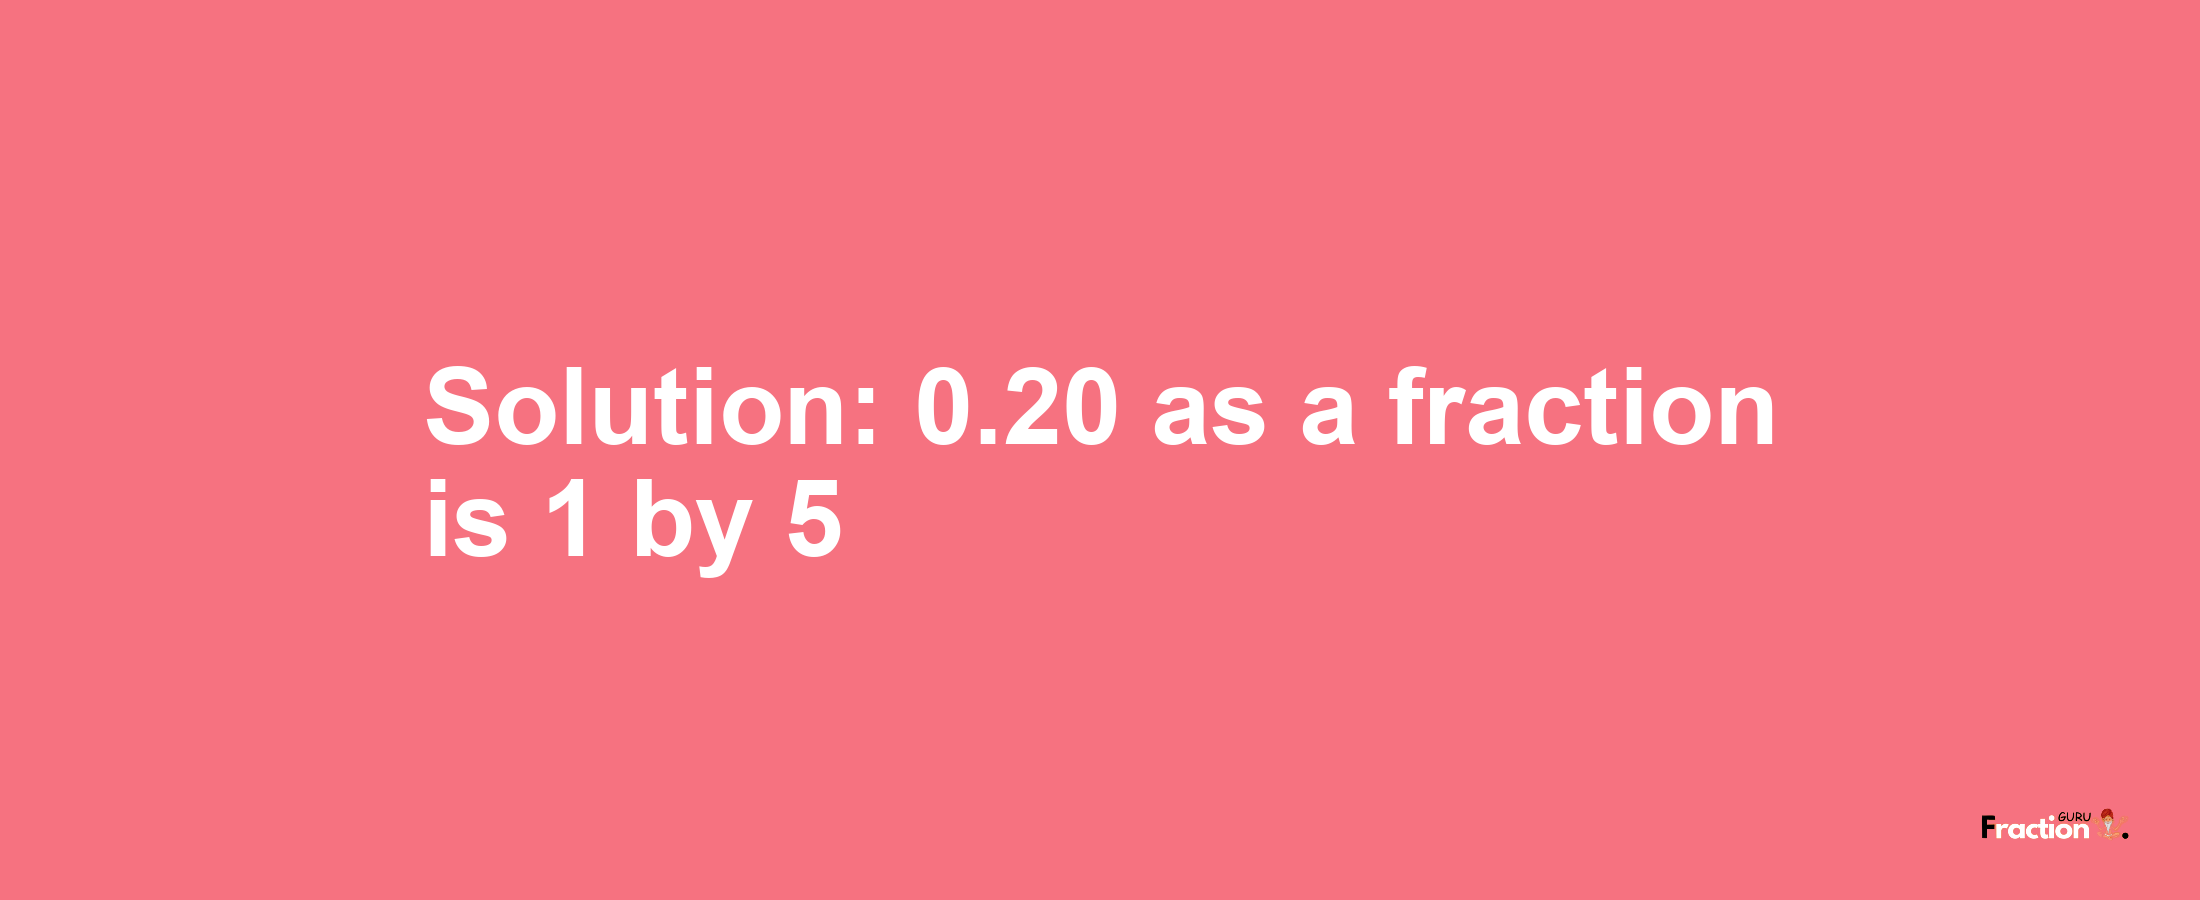 Solution:0.20 as a fraction is 1/5